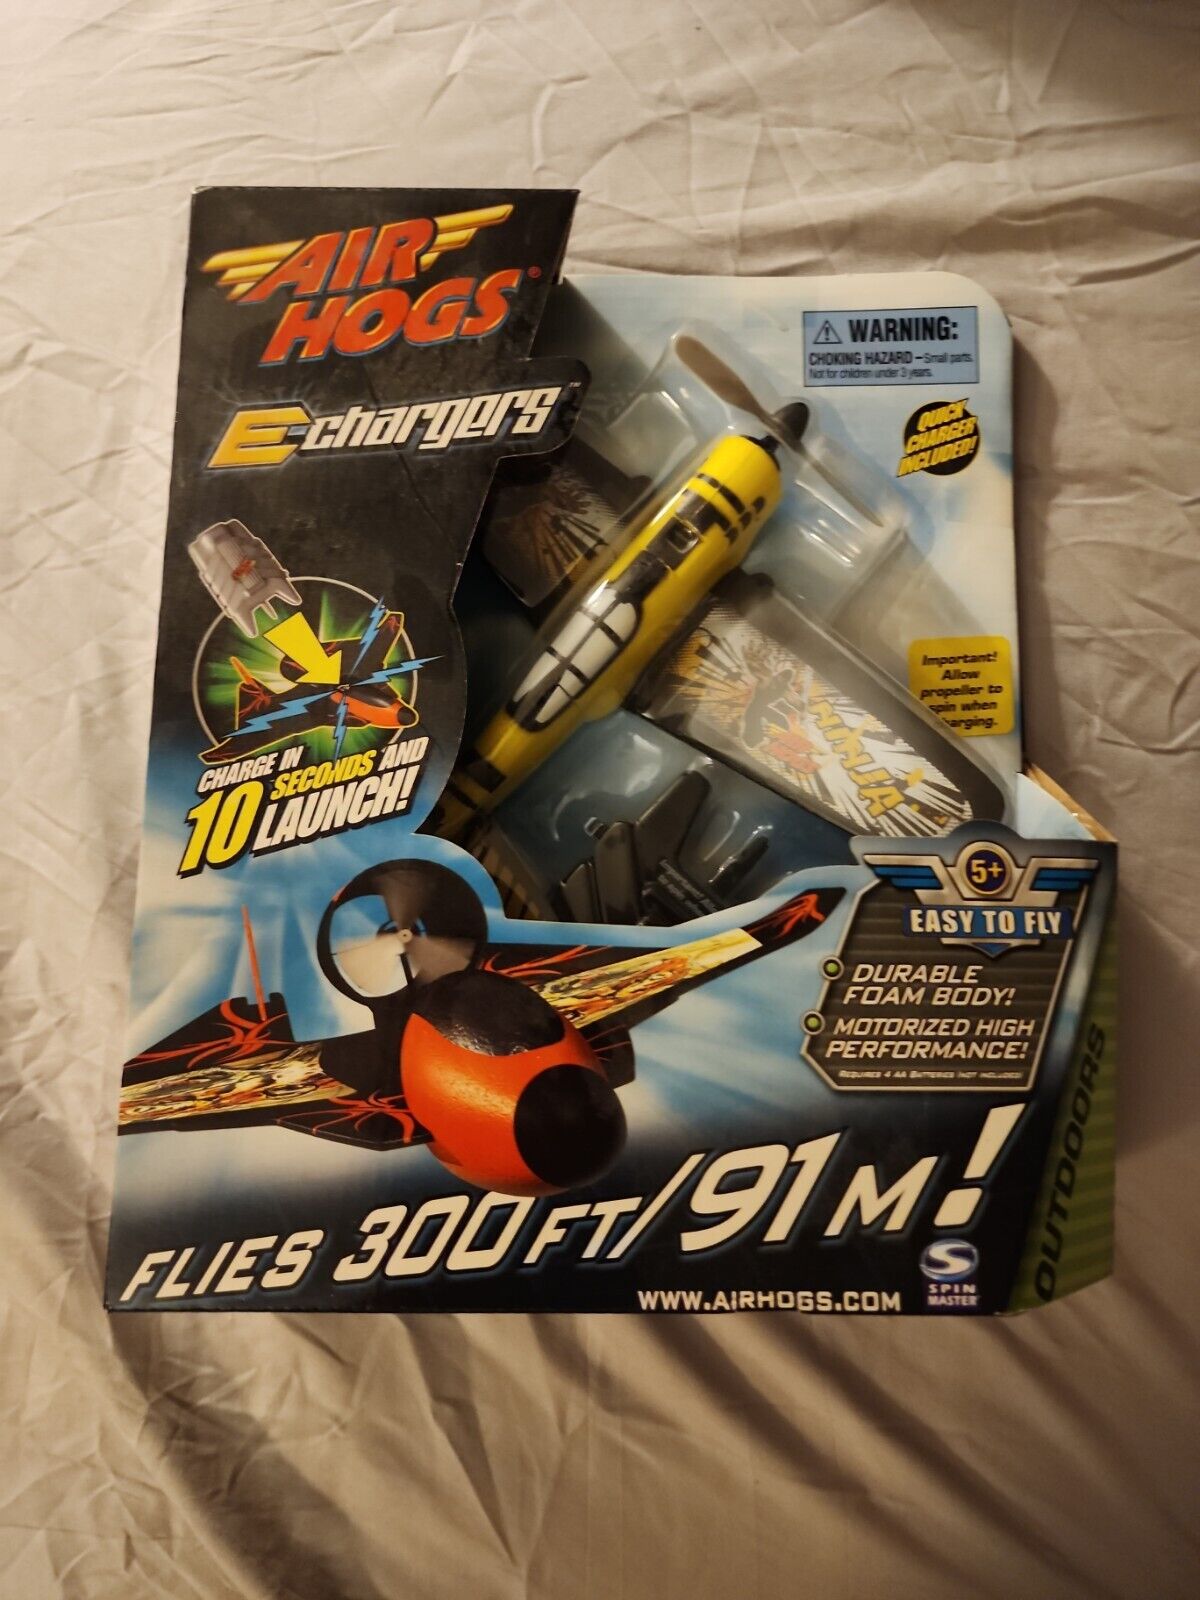 Air Hogs E Chargers Flying Airplane Spin Master